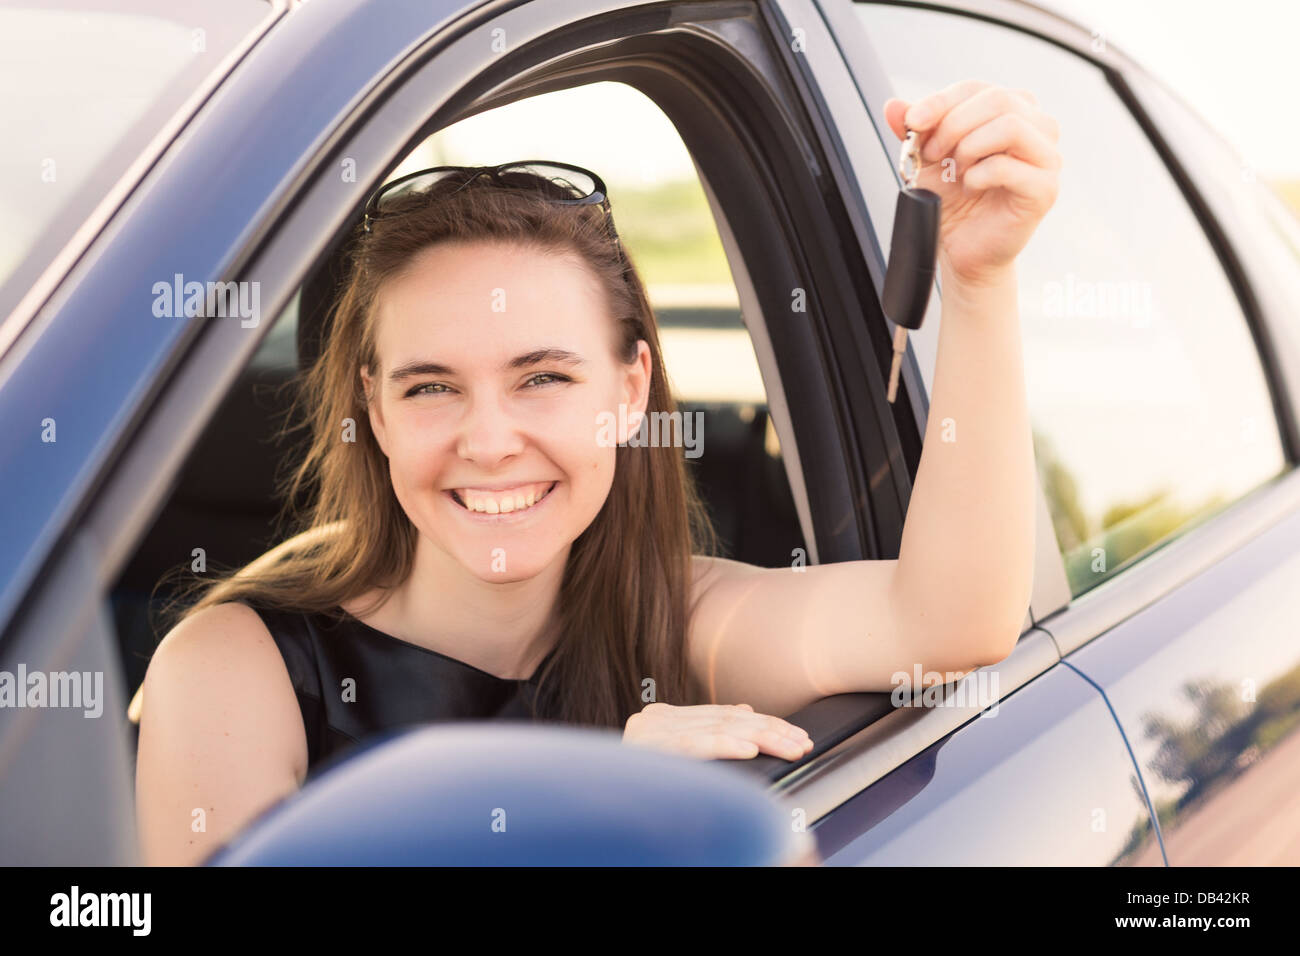 She a car now. Woman Drive car. Business woman with child in car. Model young woman Driving car. Мужчина в машине за рулем селфи.